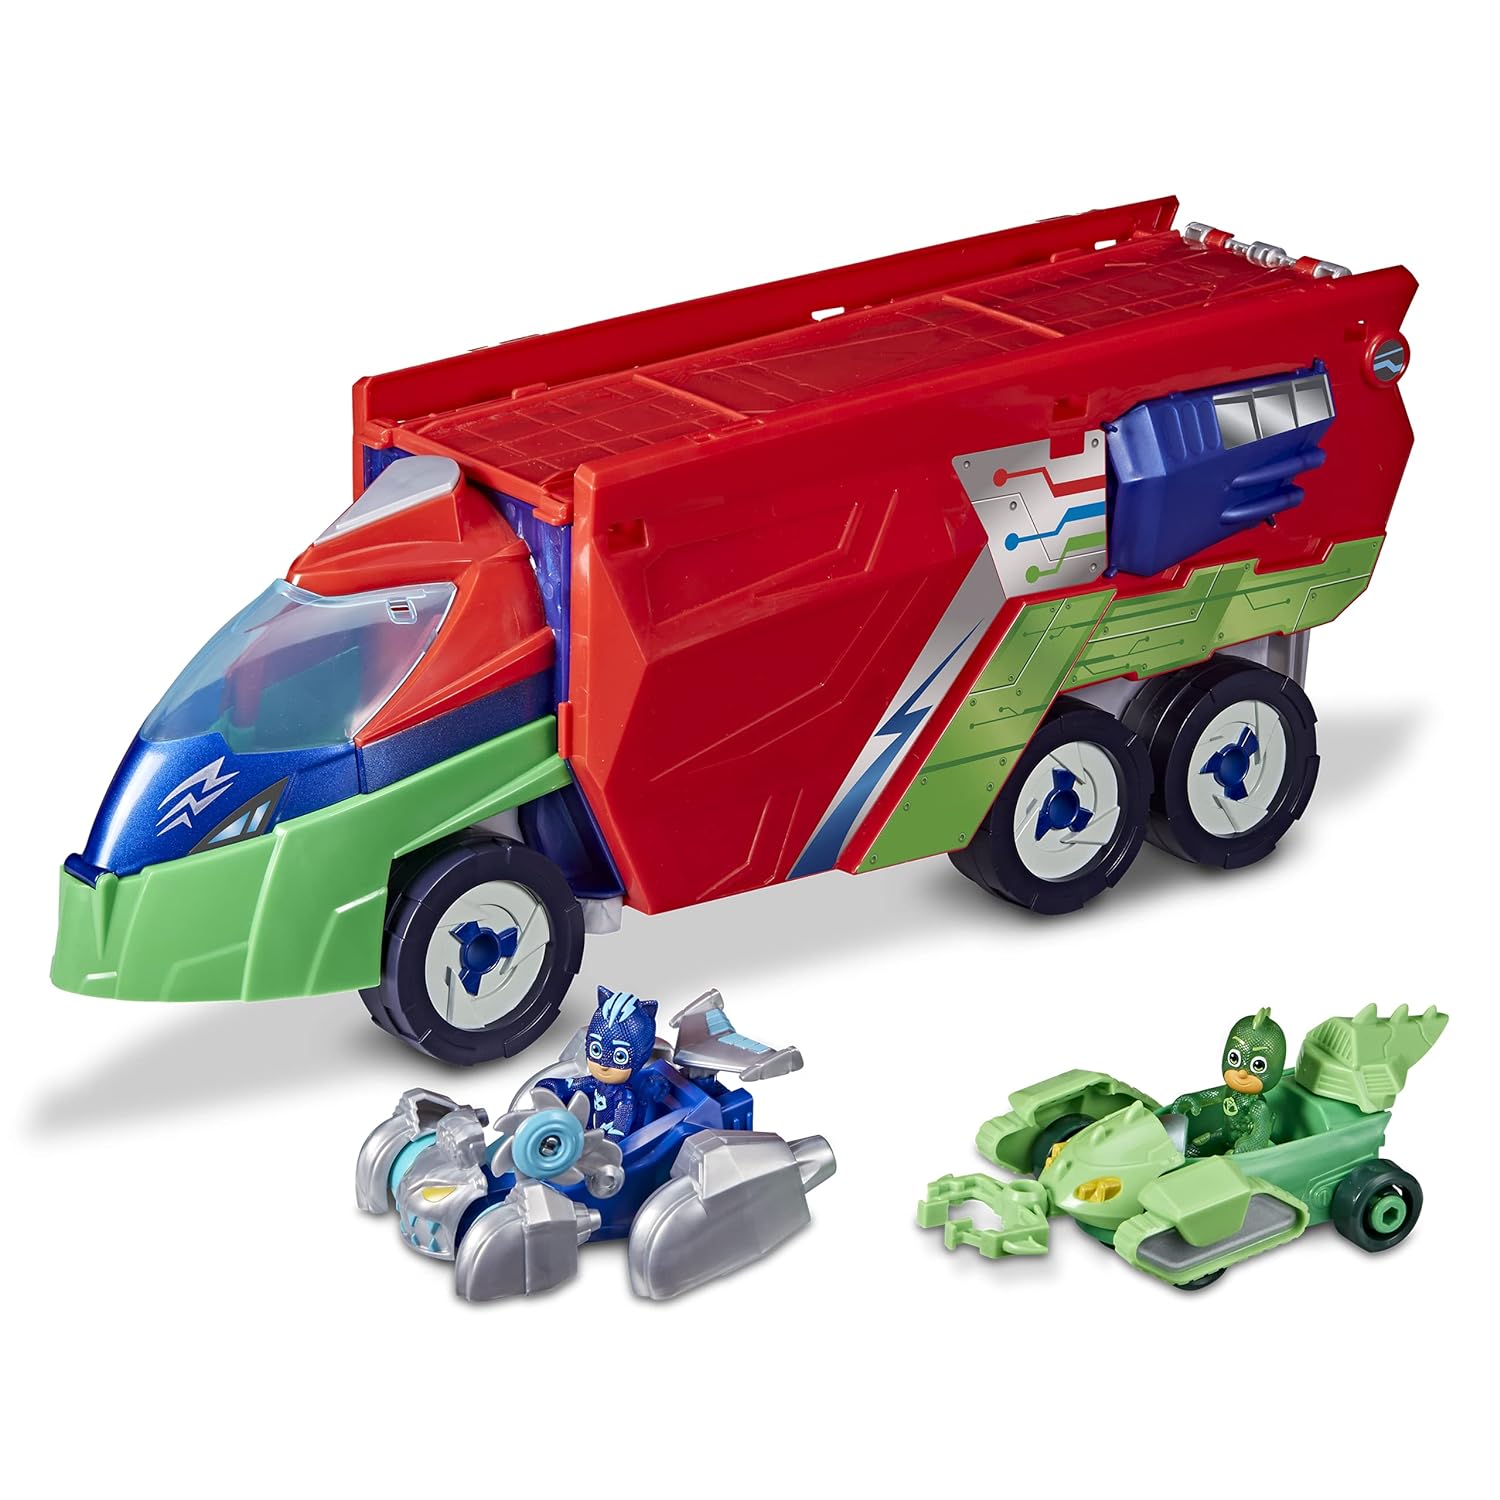 Hasbro PJ Masks PJ Launching Seeker Preschool Toy, Transforming Vehicle Playset with 2 Cars, 2 Action Figures, and More, for Kids …